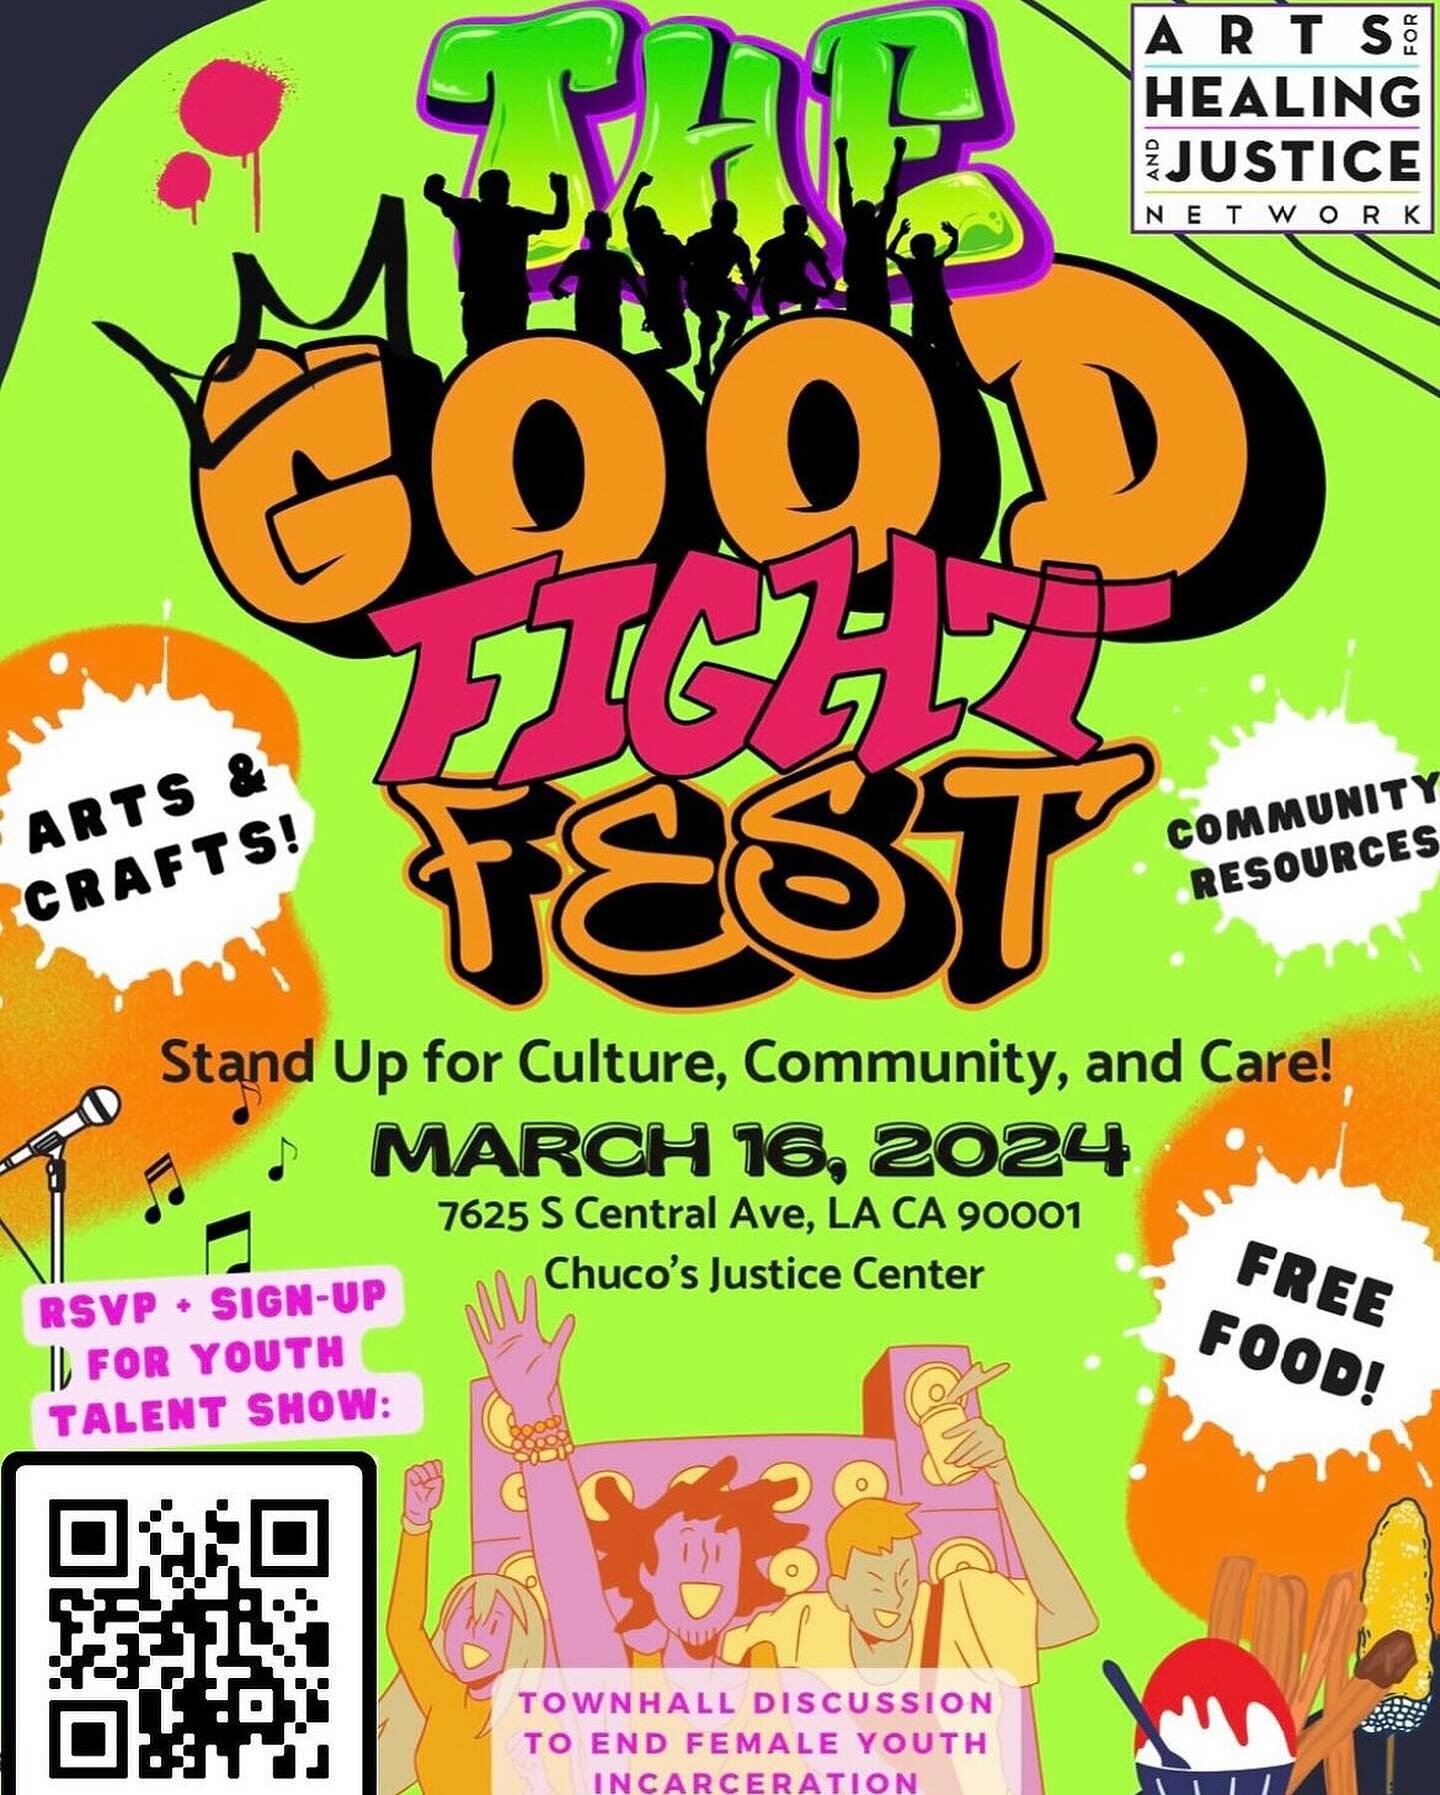 Join us for a performance on March 16 at The Good Fight Fest! 🌟 Experience a day of community, culture, and care with free food, community resources, and engaging activities including a town hall discussion on ending incarceration of girls and gende